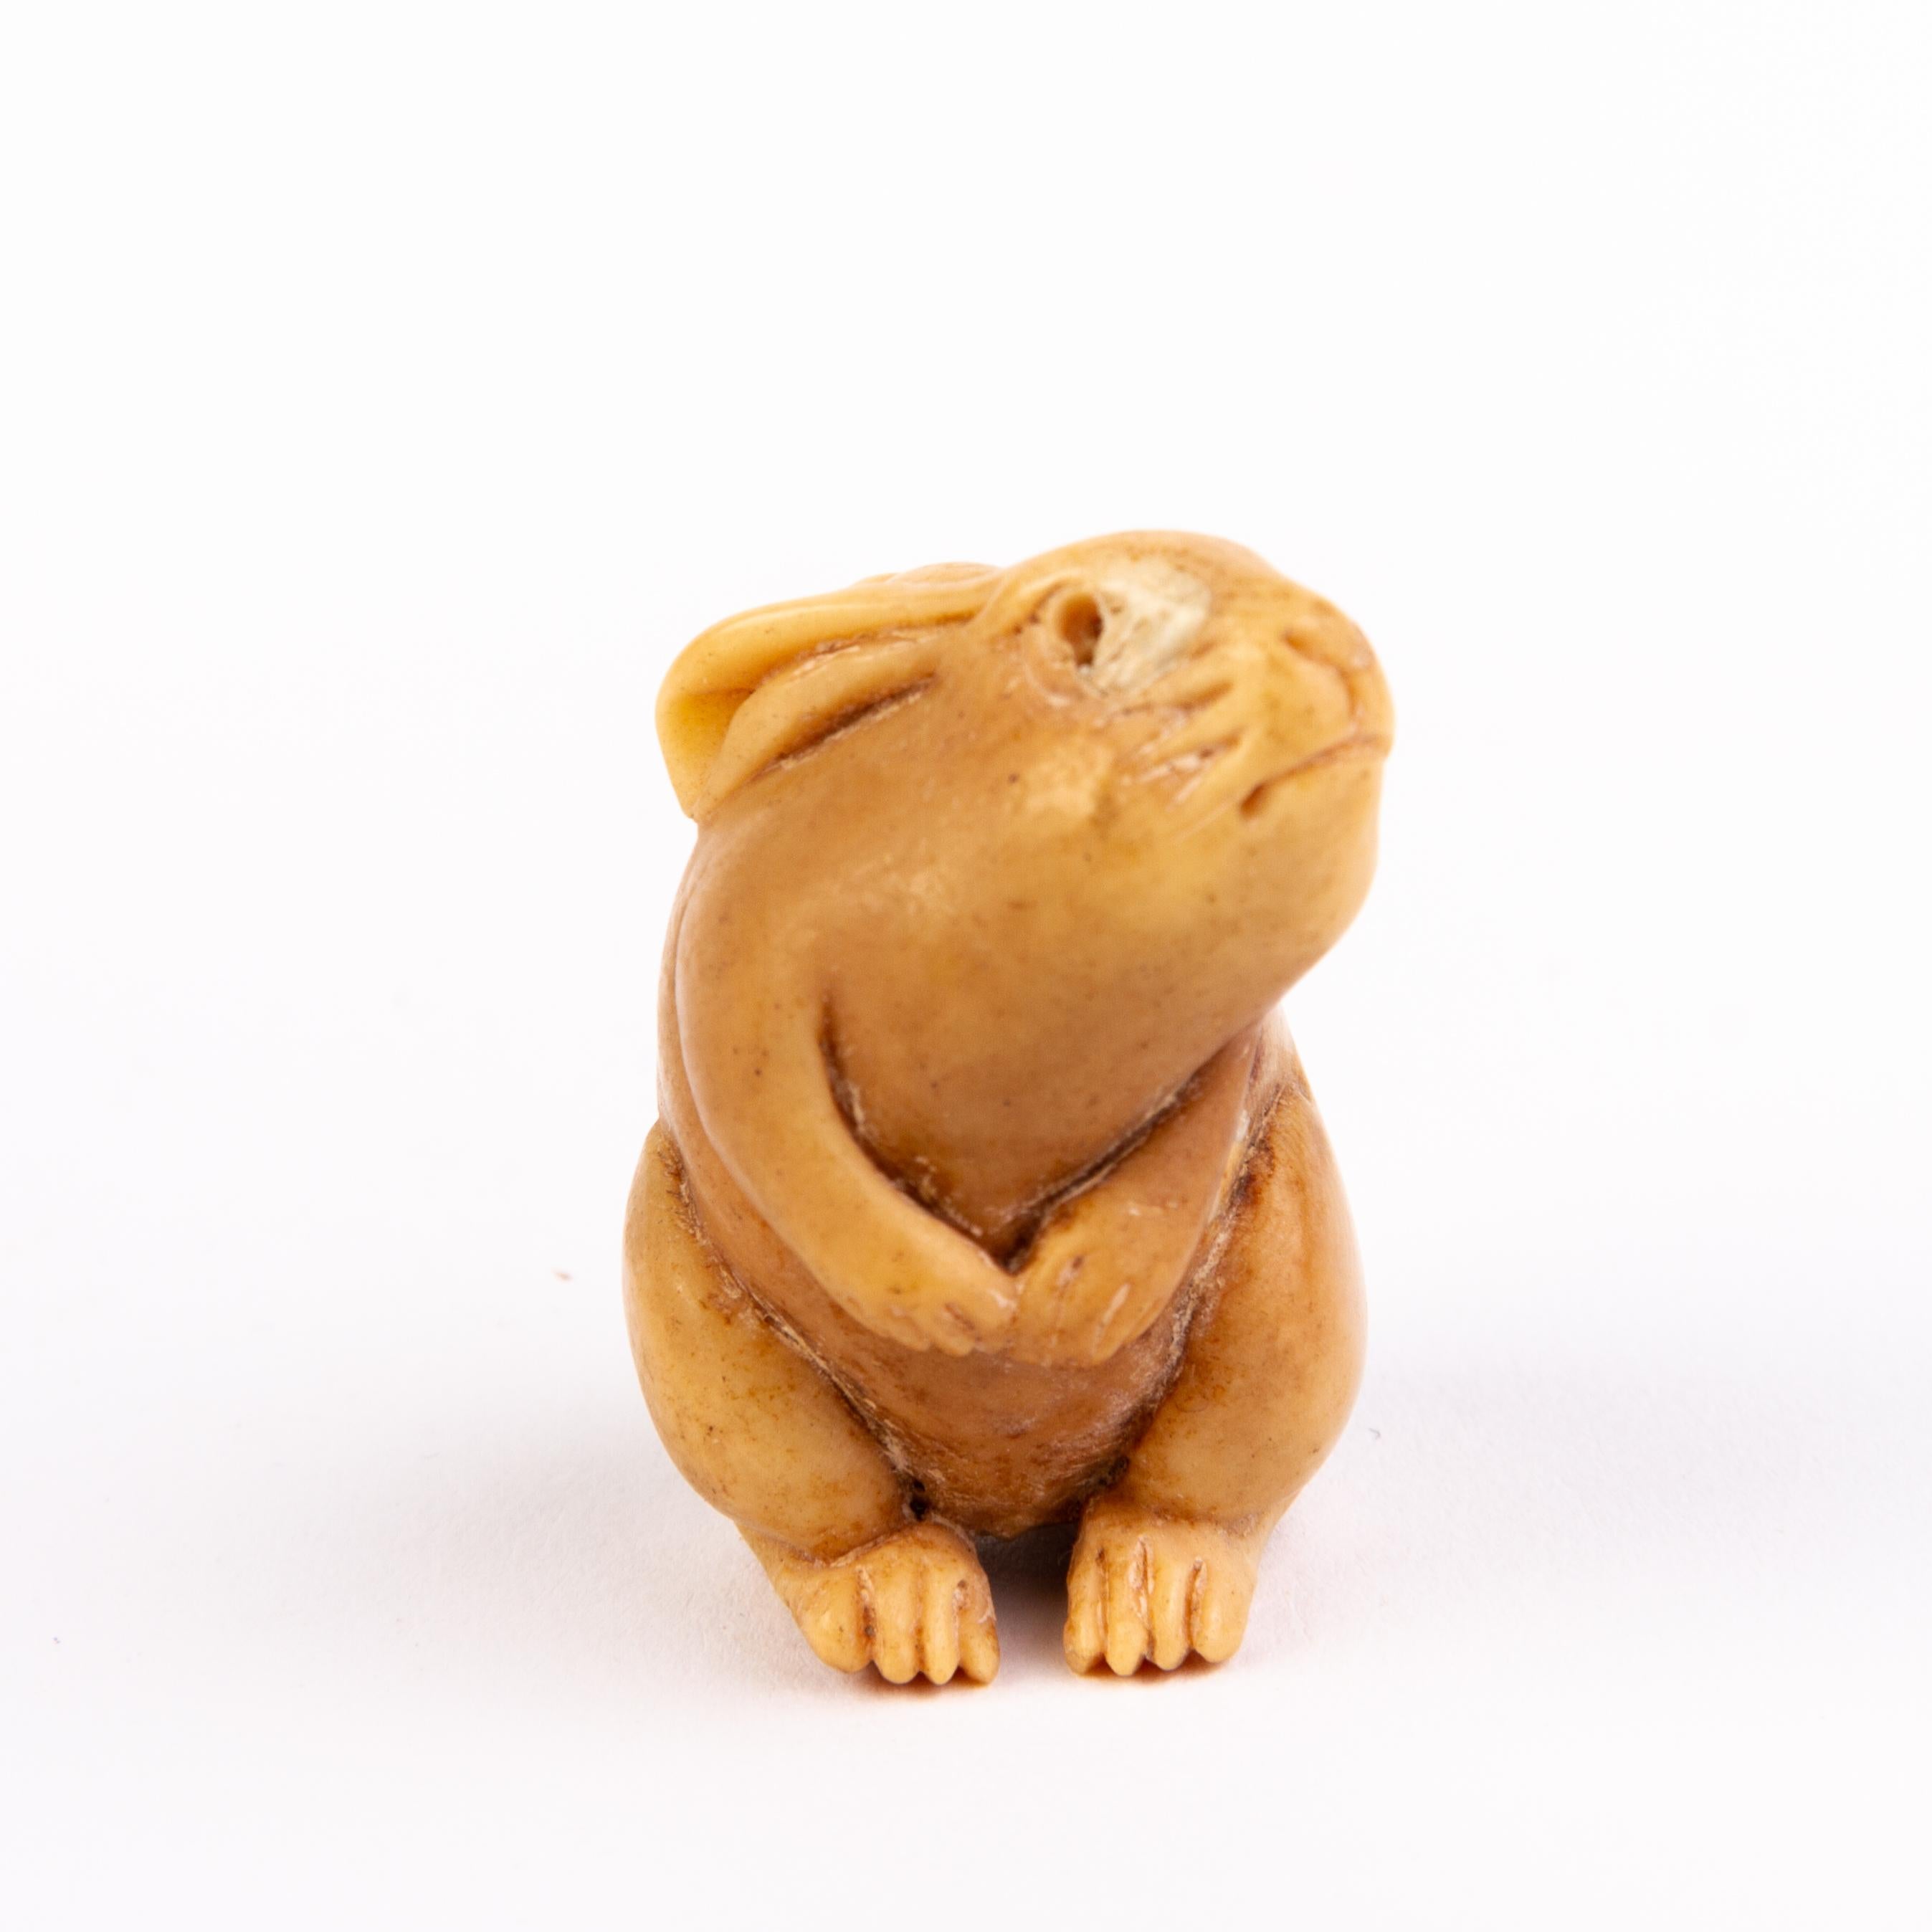 In good condition
From a private collection
Free international shipping
Japanese Tagua Nut Netsuke of a Rabbit